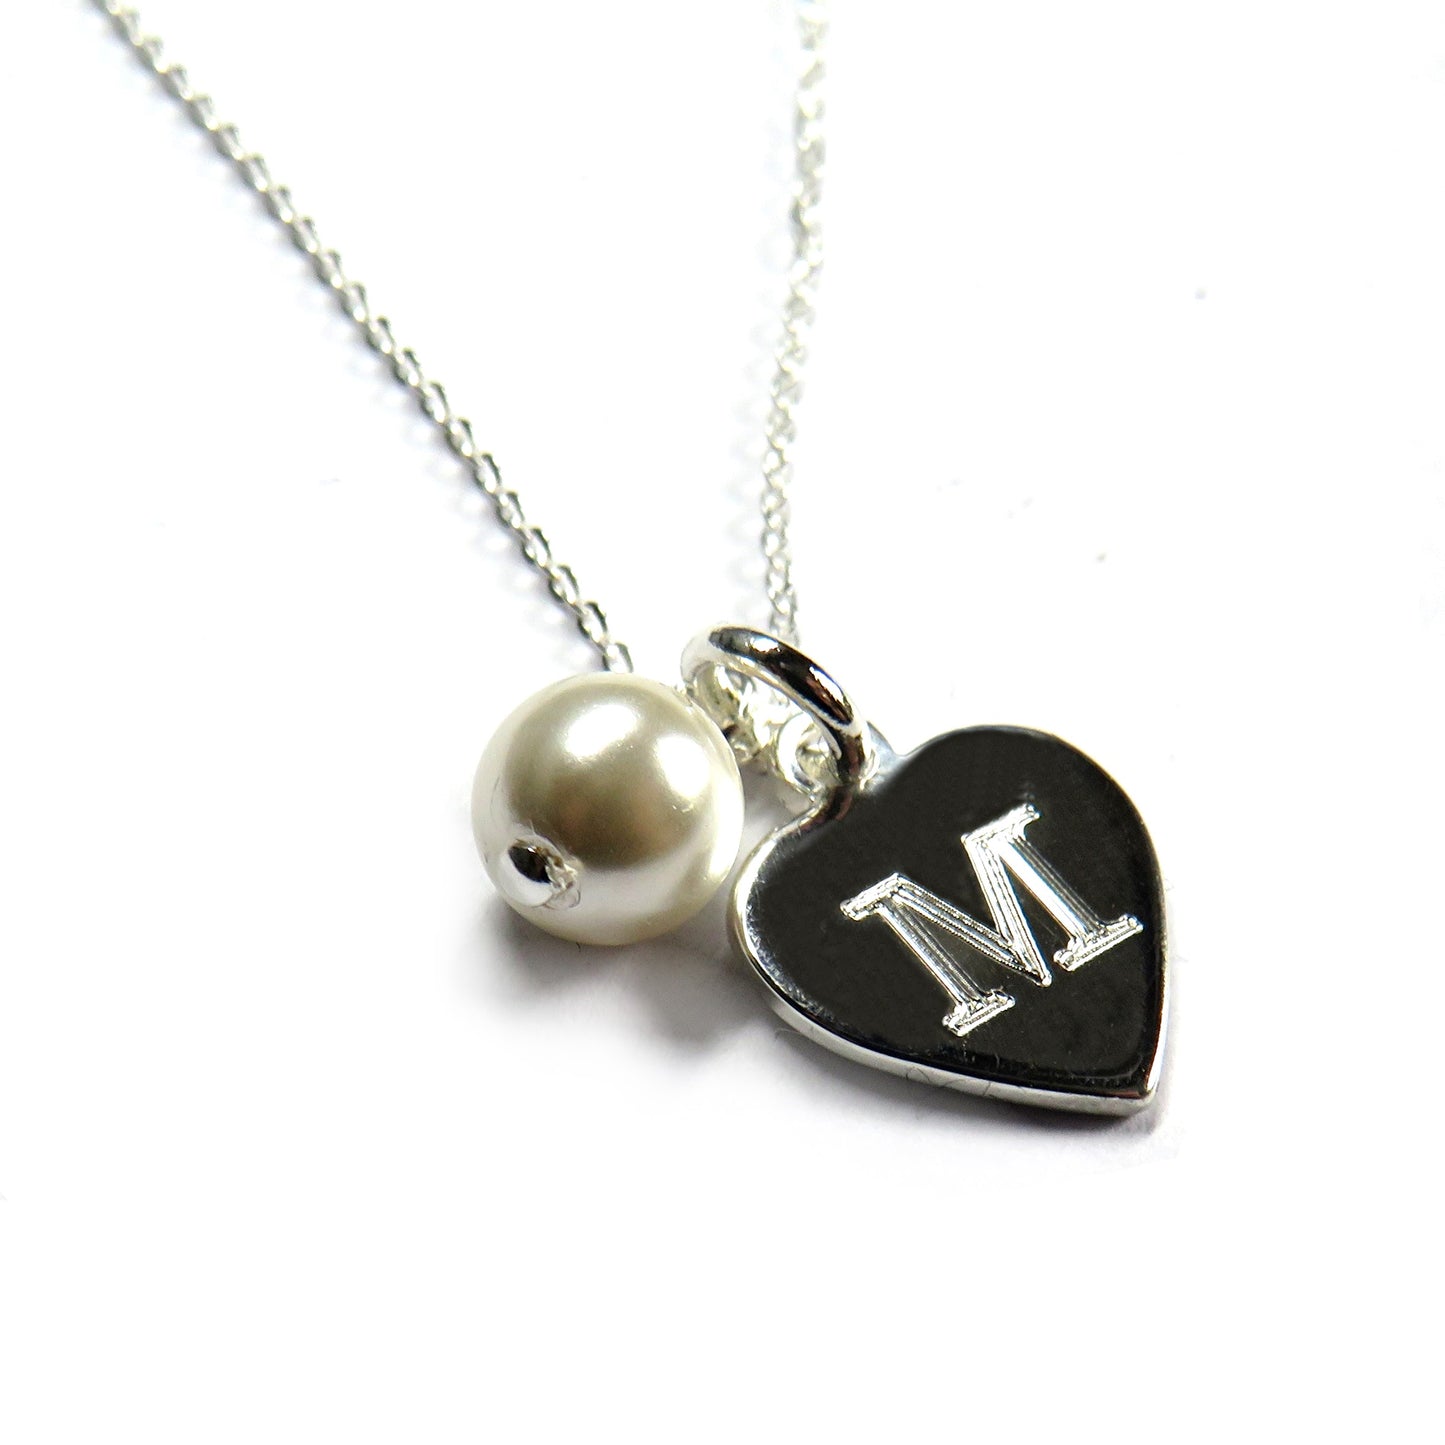 Personalised Silver Mini Heart & Pearl Necklace